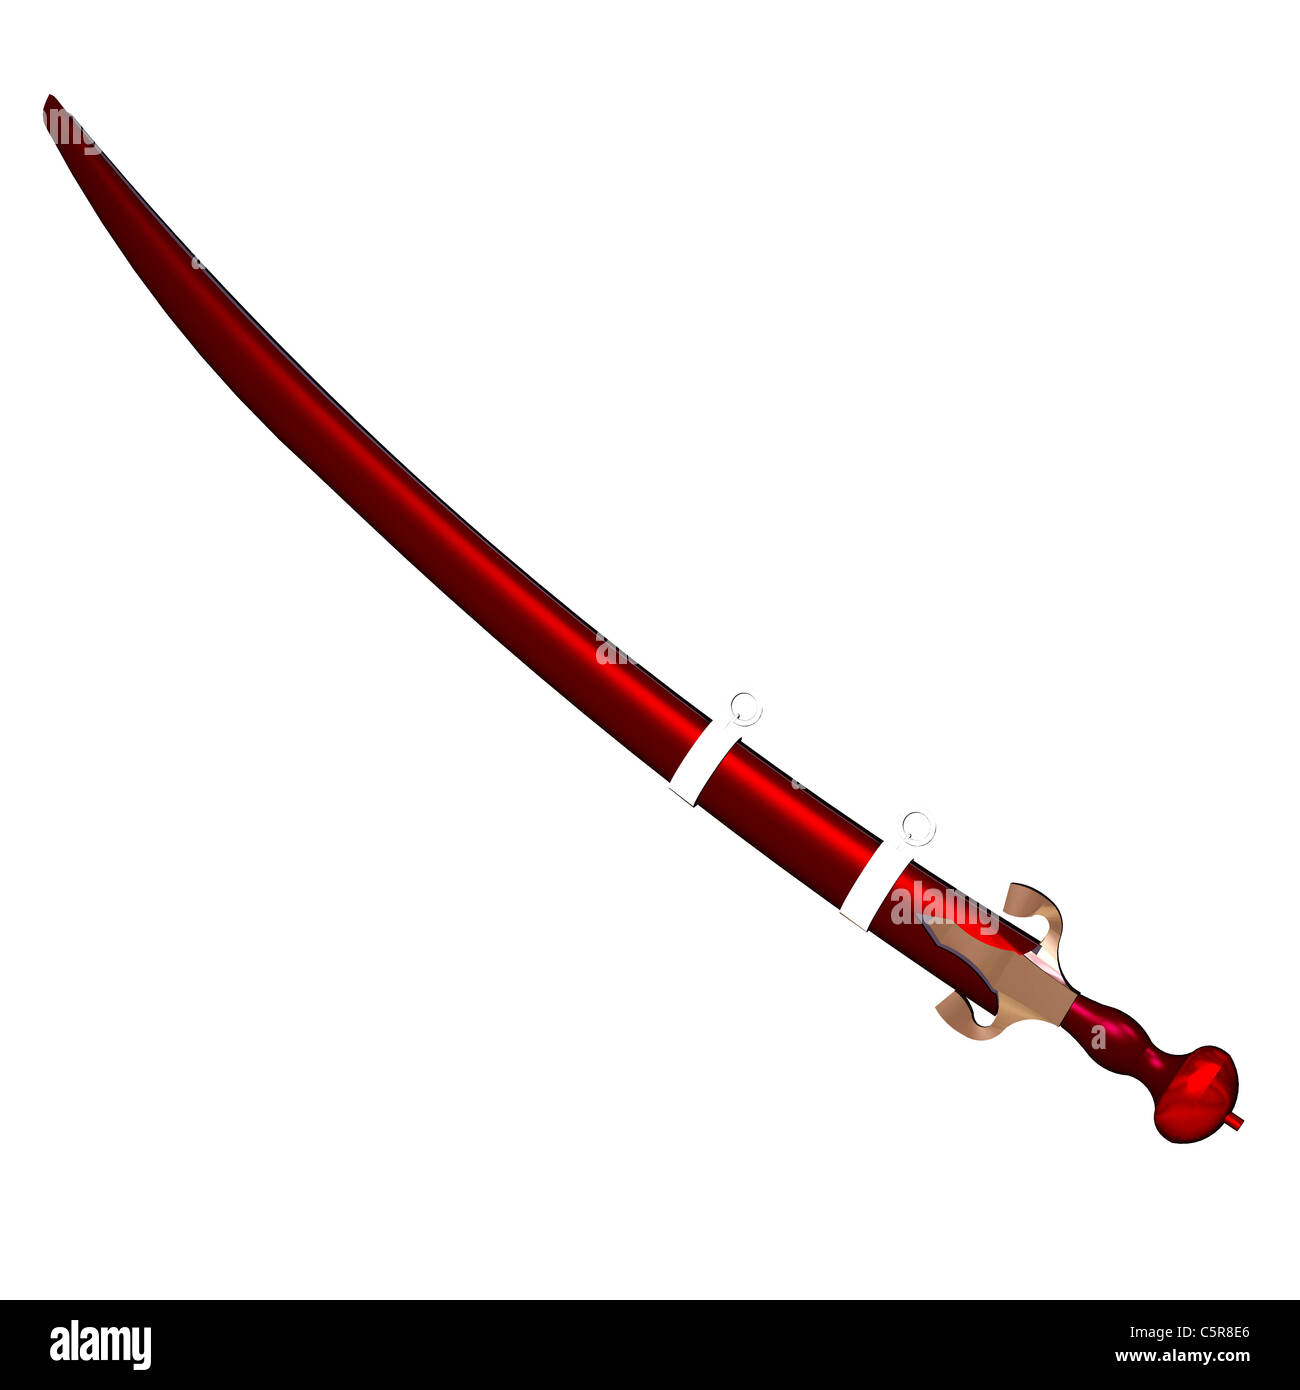 Illustration of a sword isolated on a white background Stock Photo